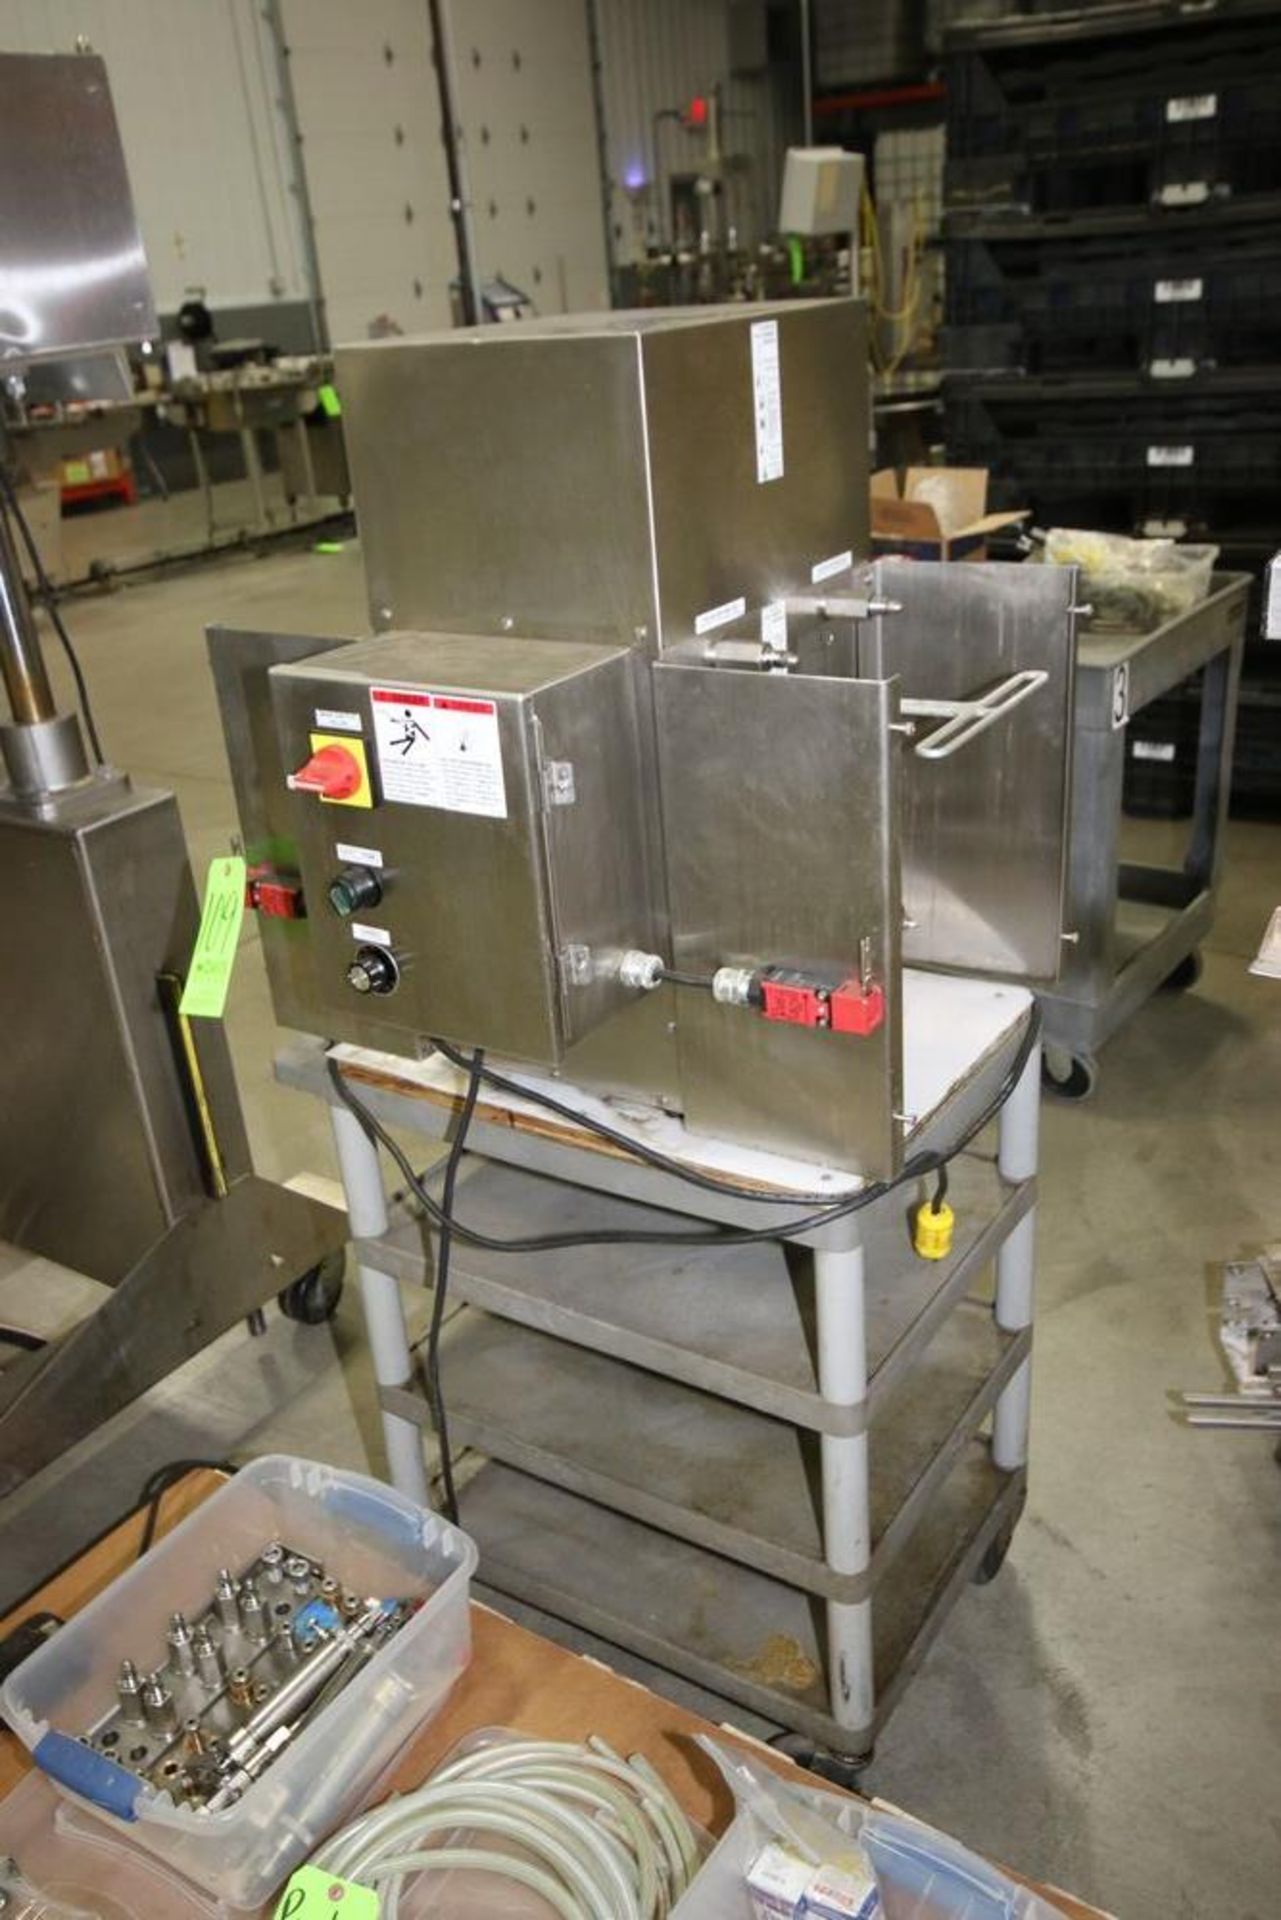 Filamatic Liquid Filling Machine, M/N DAB-8-4, S/N 021238, with Foot Pedal, with Spare Parts - Image 4 of 7